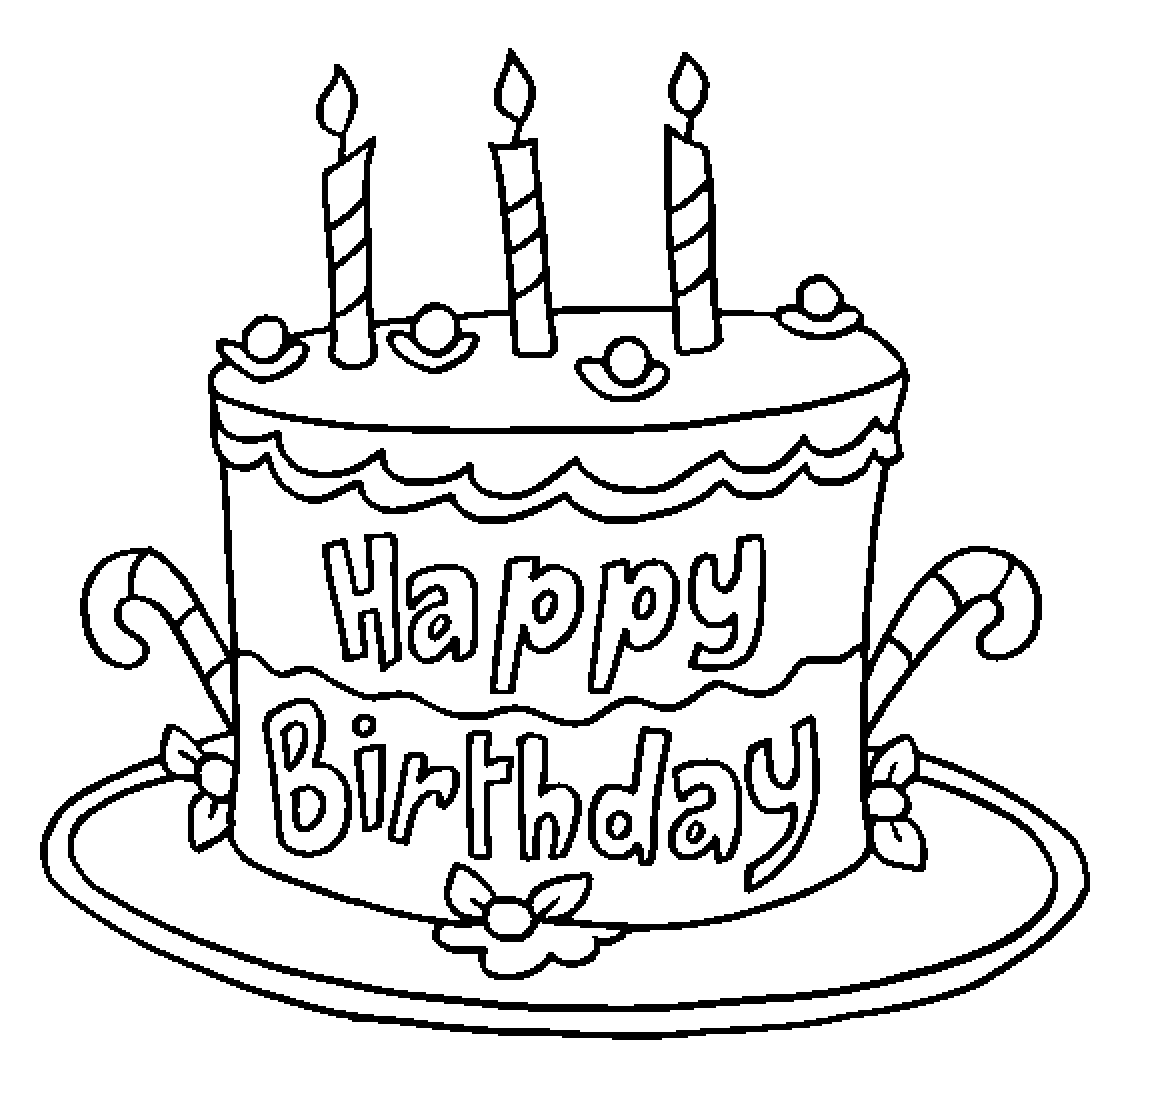 Birthday Cake Coloring Pages For Kids